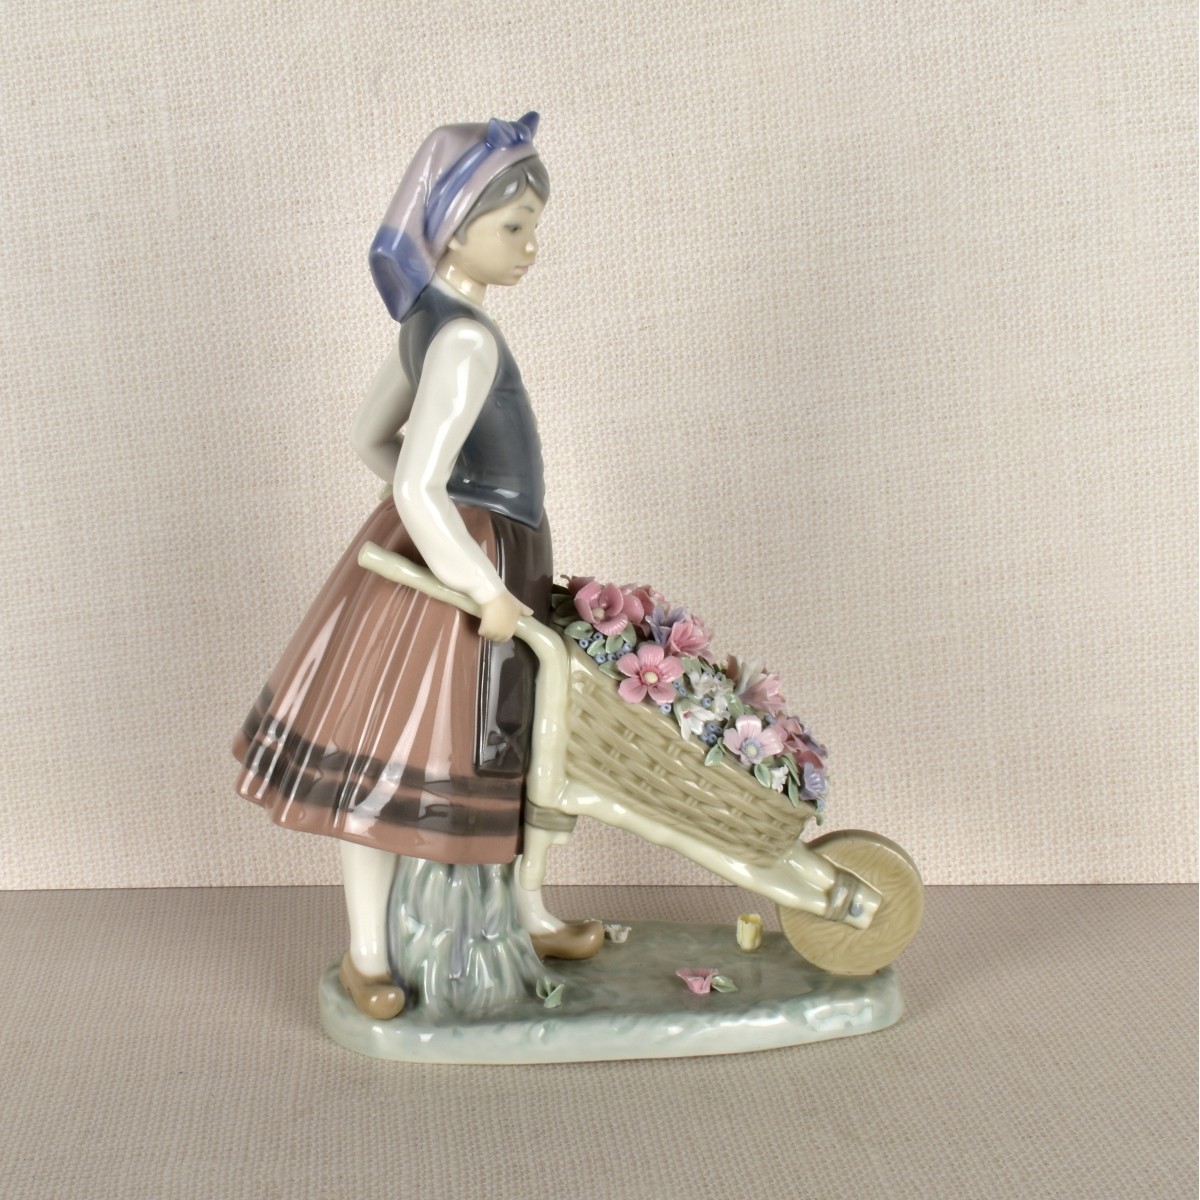 Lladro Figurine of a Girl with FLowers